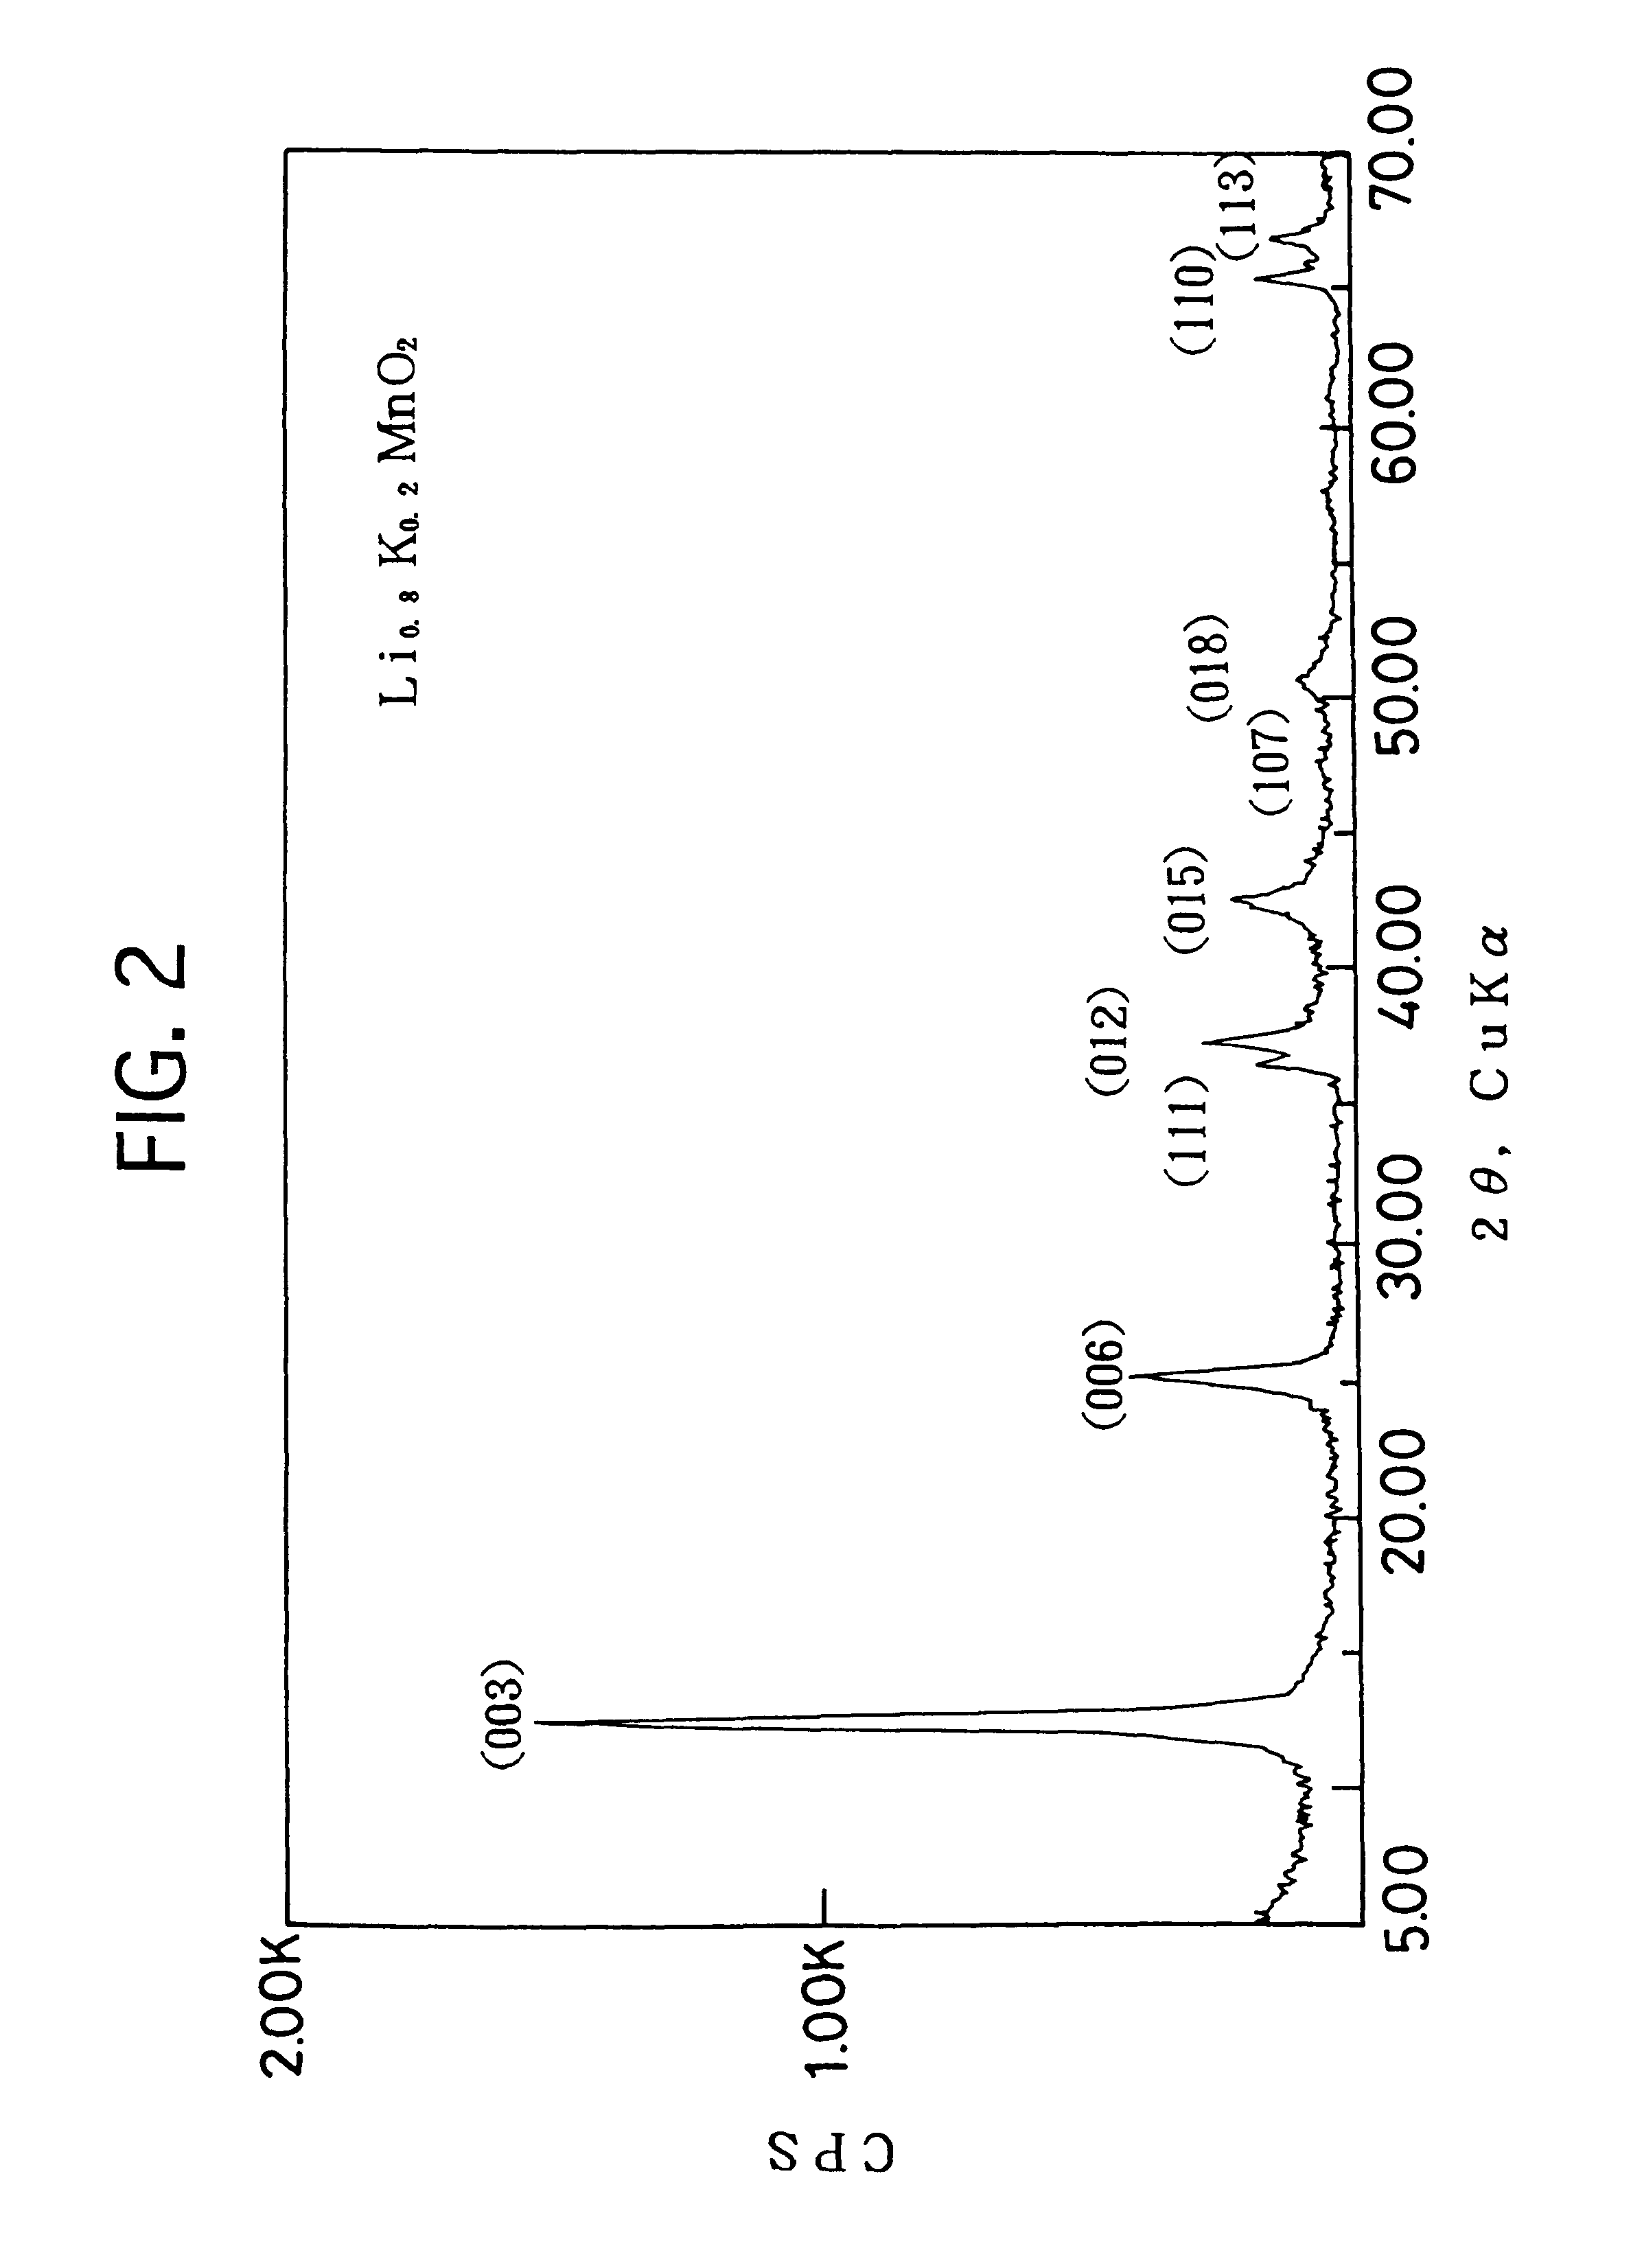 Lithium manganese composite oxide for lithium secondary battery cathode active material, manufacturing method thereof, and lithium secondary battery using the composite oxide as cathode active material